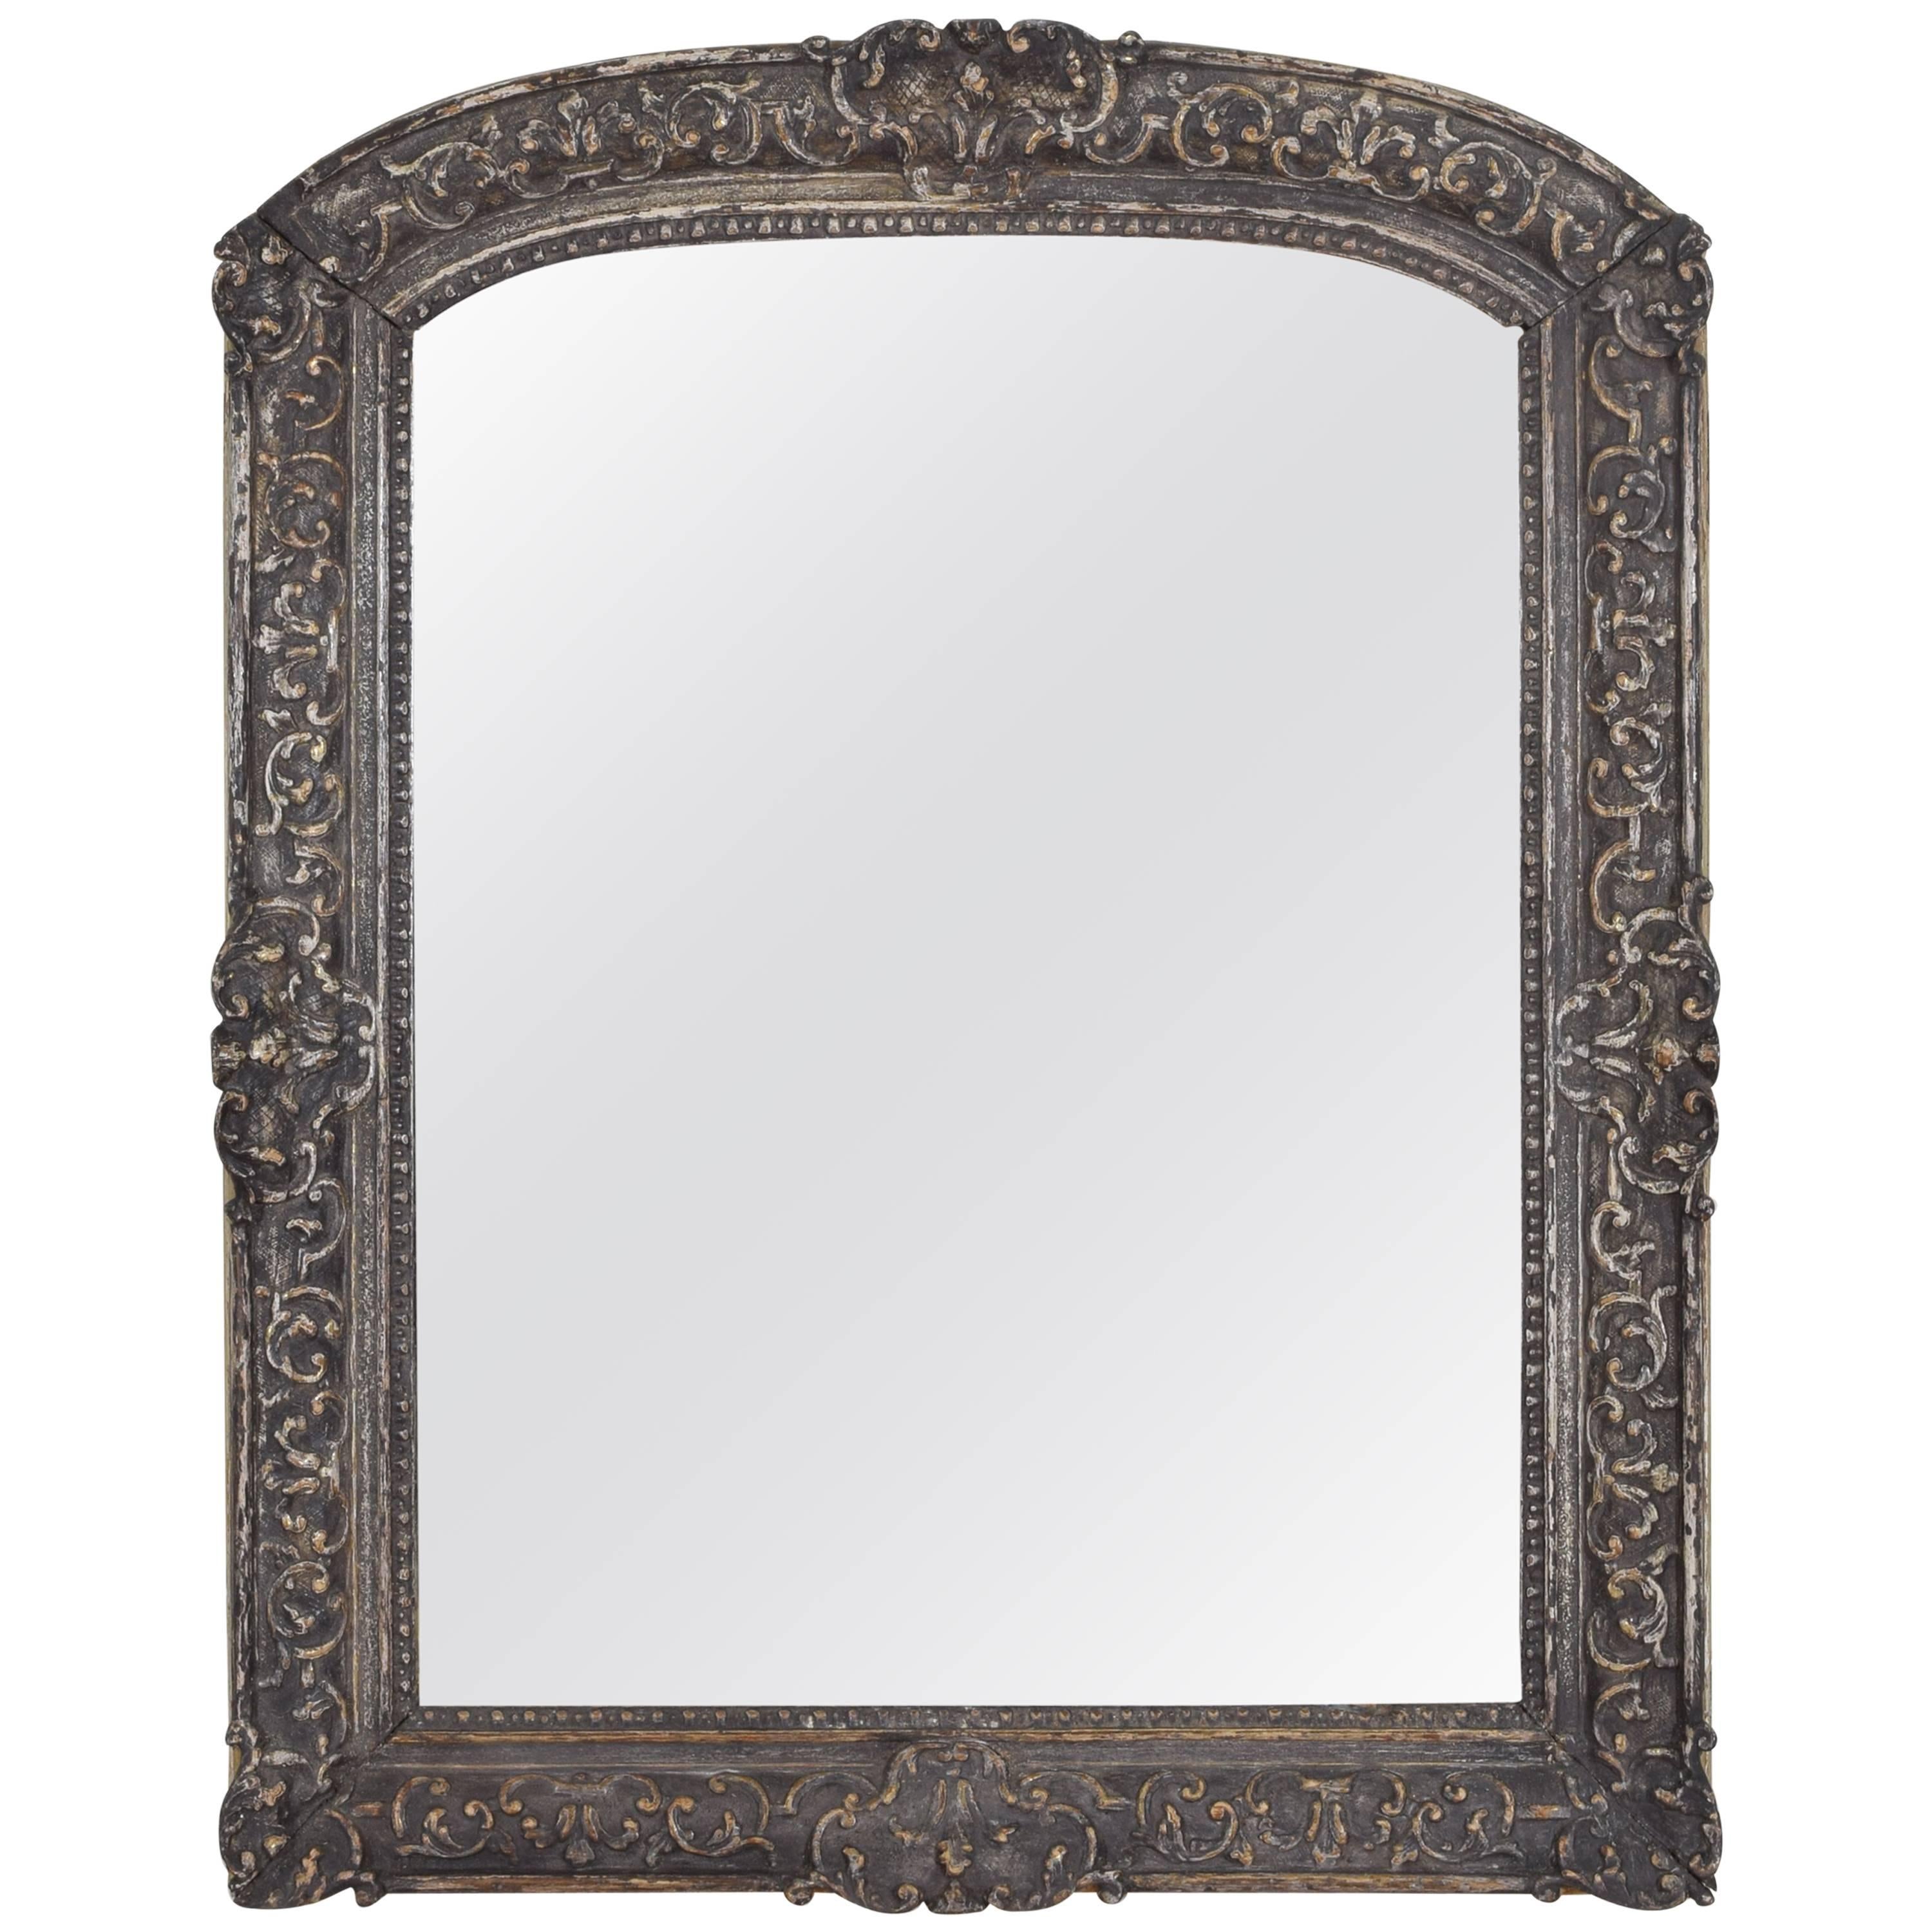 French Carved Regence Mirror, Early 18th Century